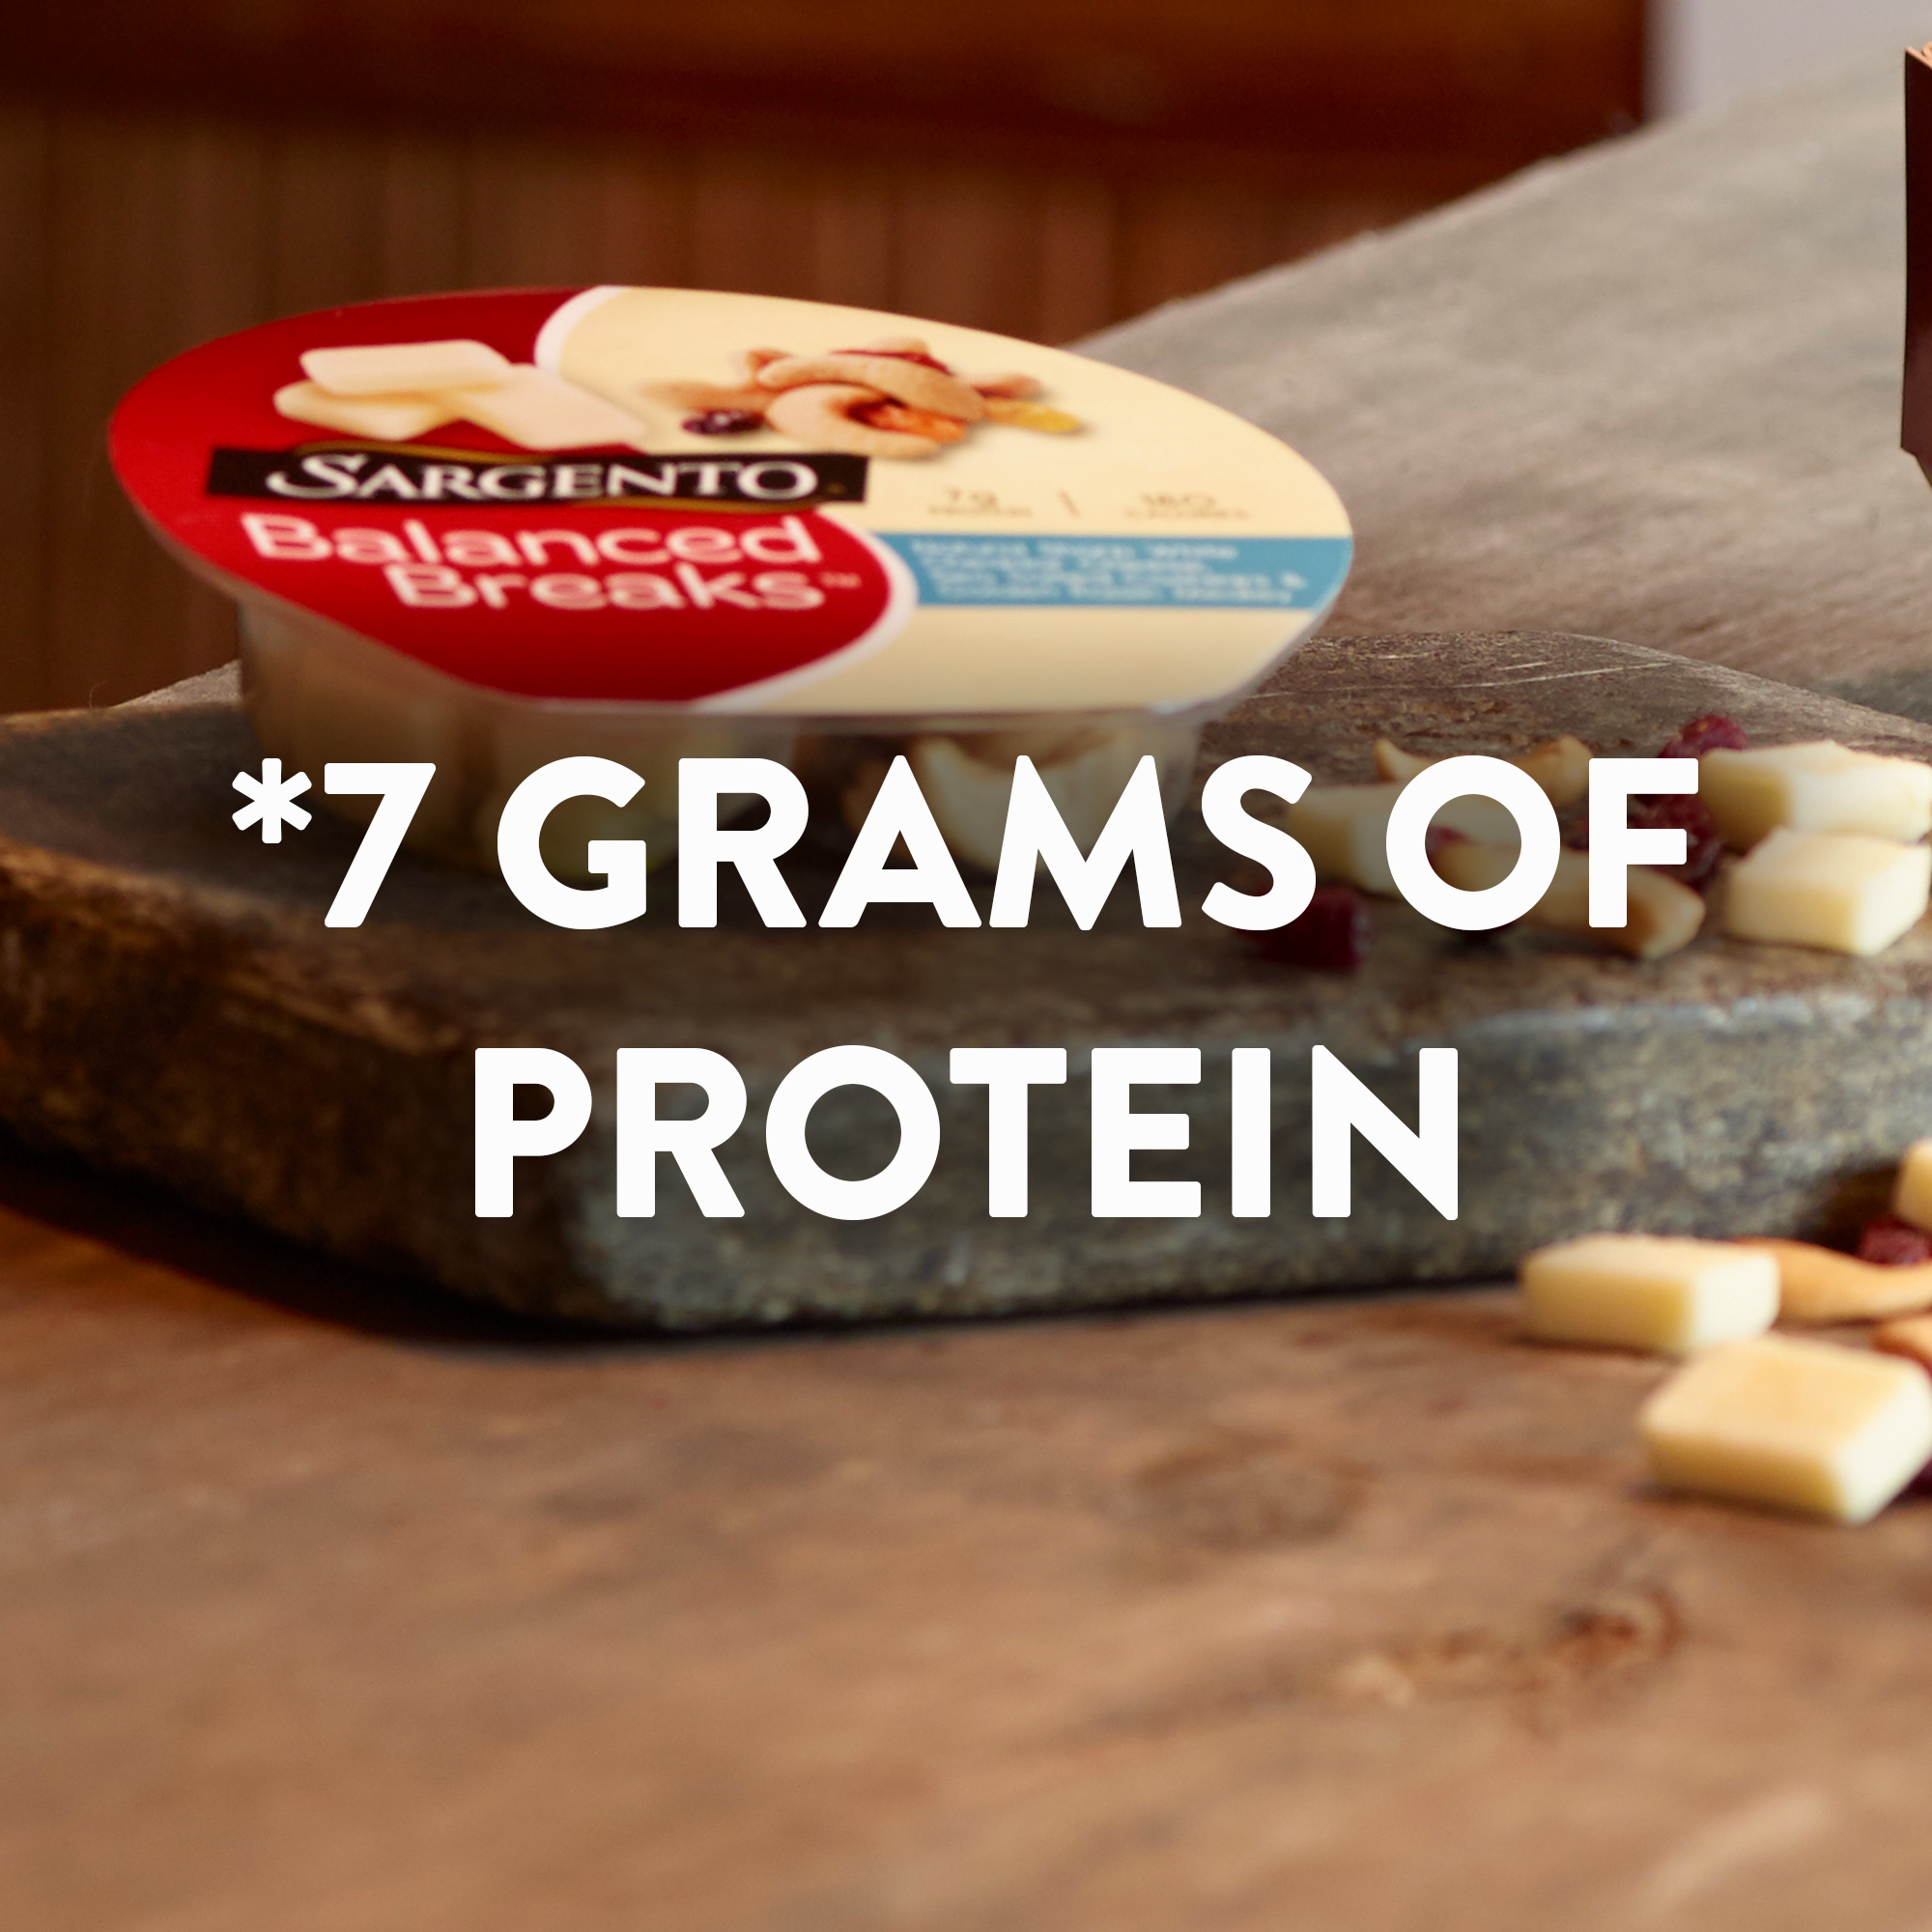 Sargento® Balanced Breaks®, Natural Sharp White Cheddar Cheese, Sea-Salted Cashews and Golden Raisin Medley